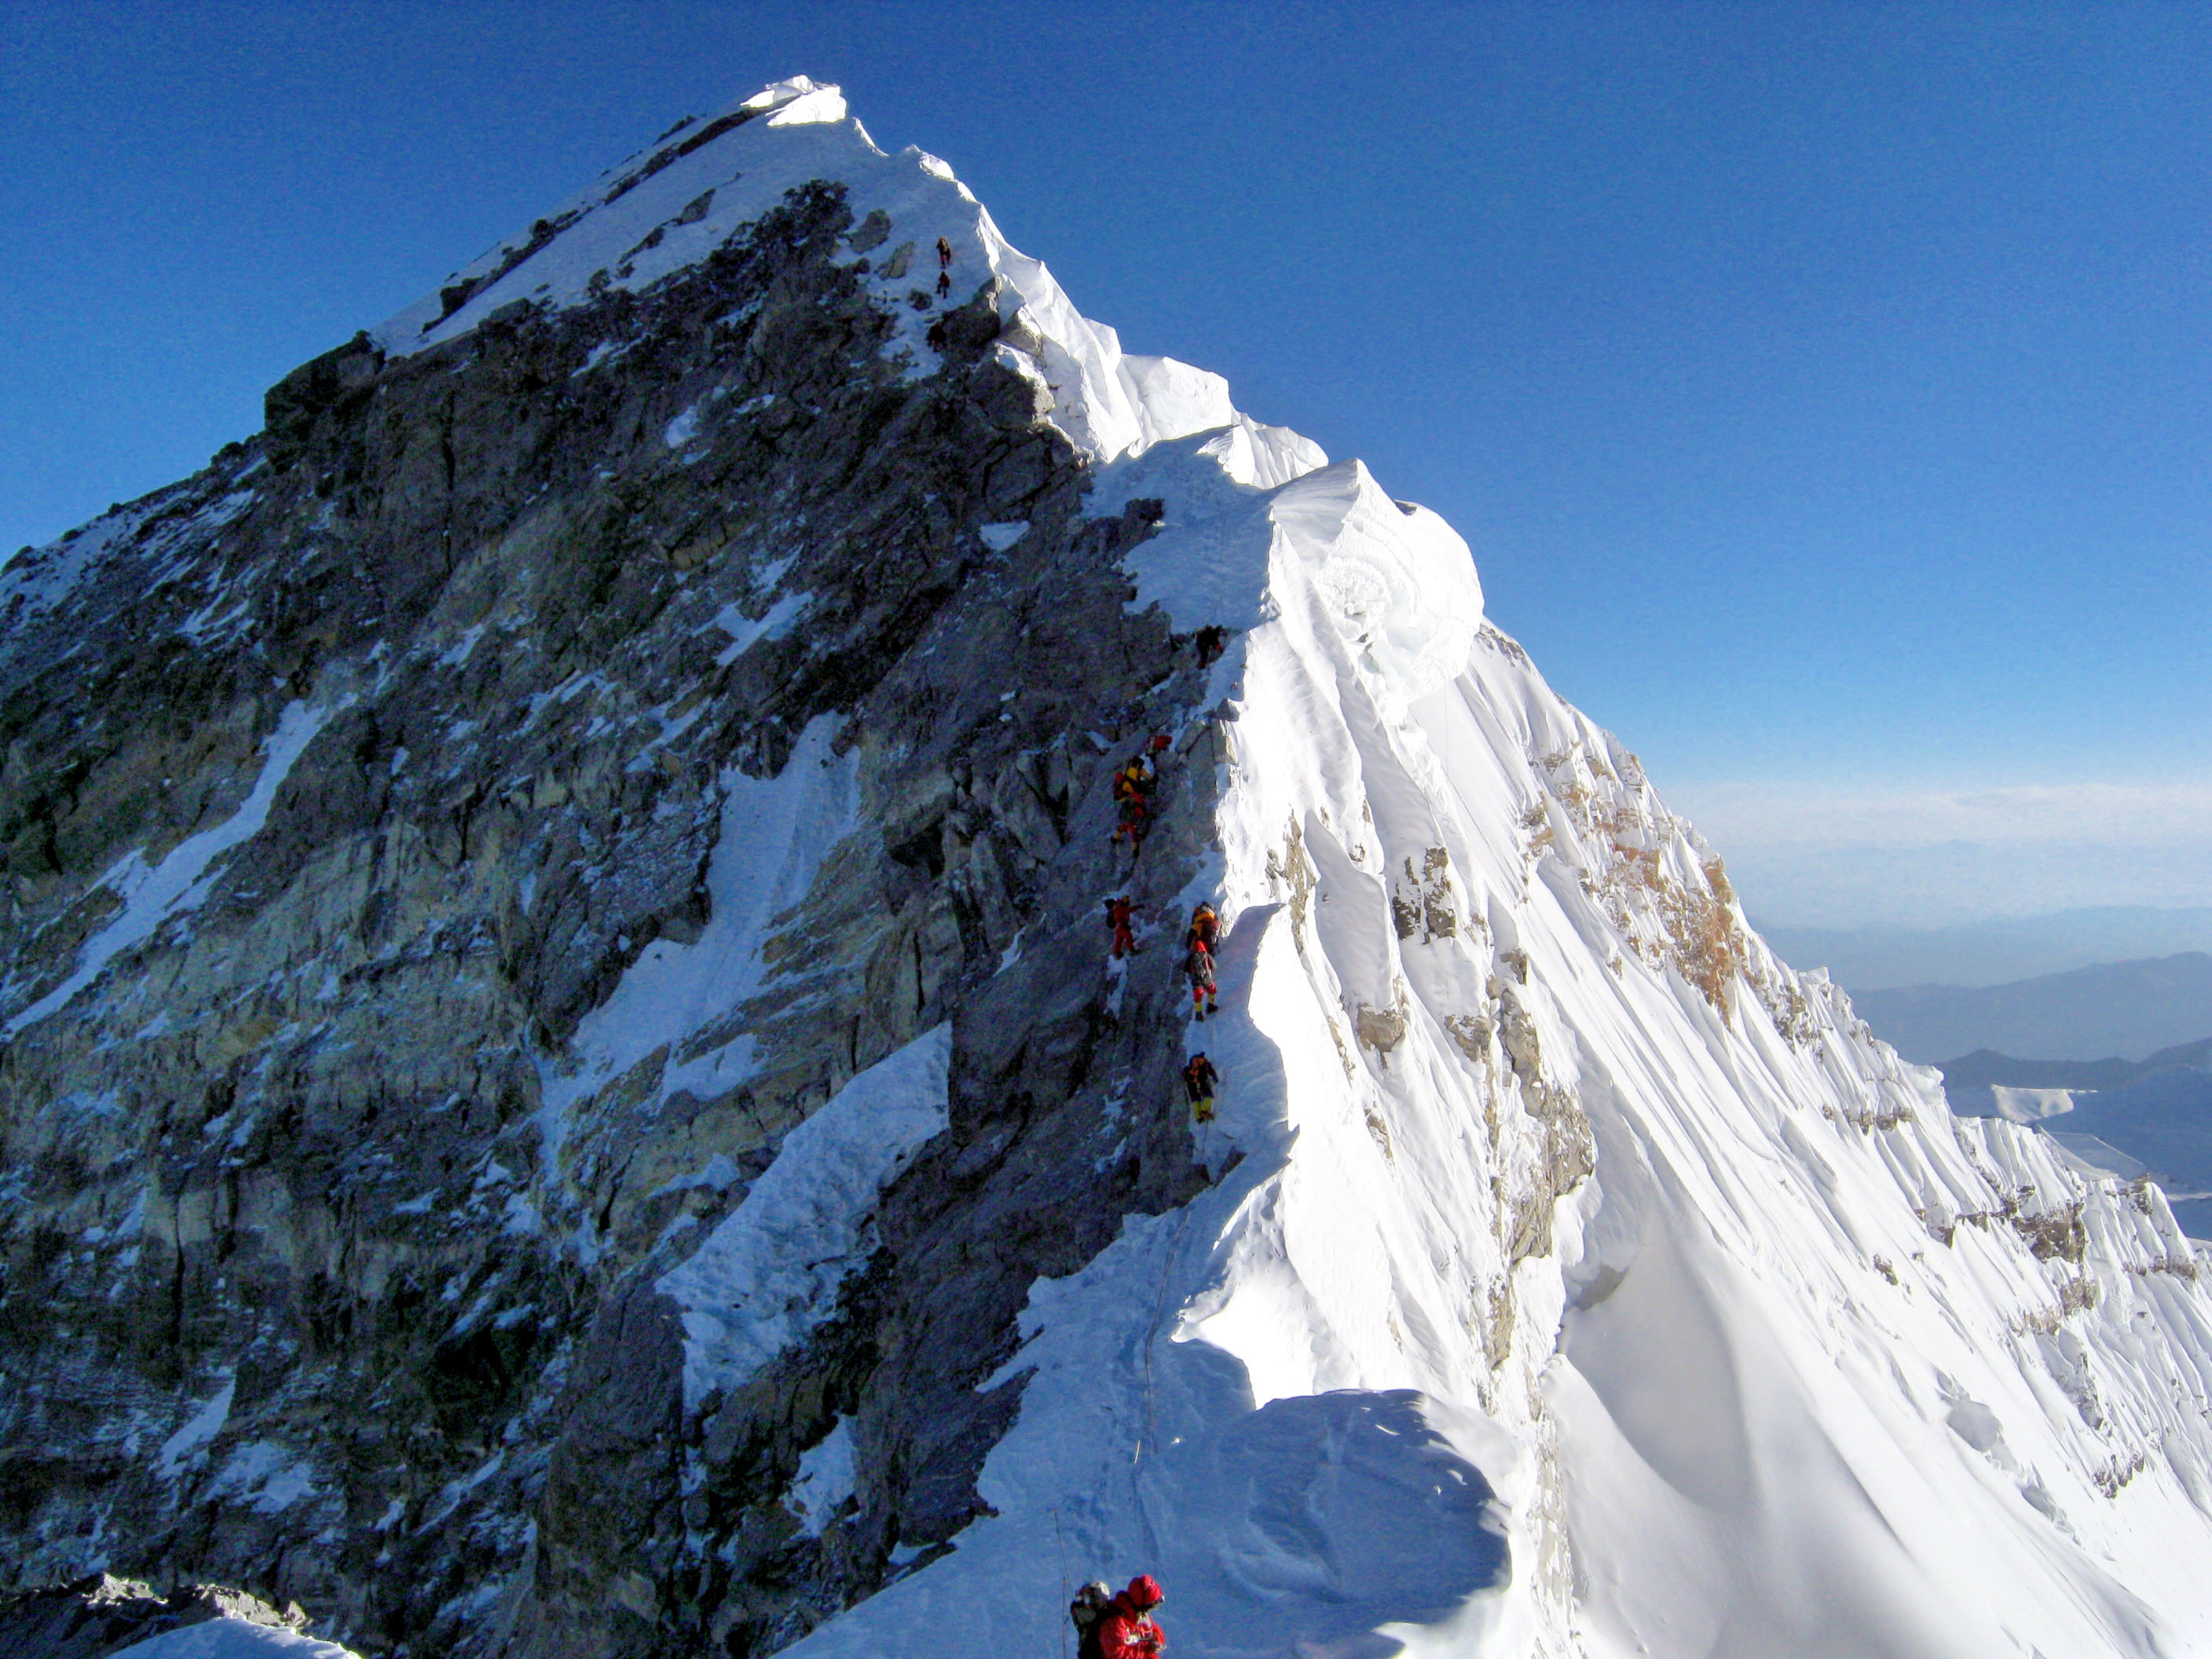 People scaling Hillary Step, near the top of Mt. Everest.